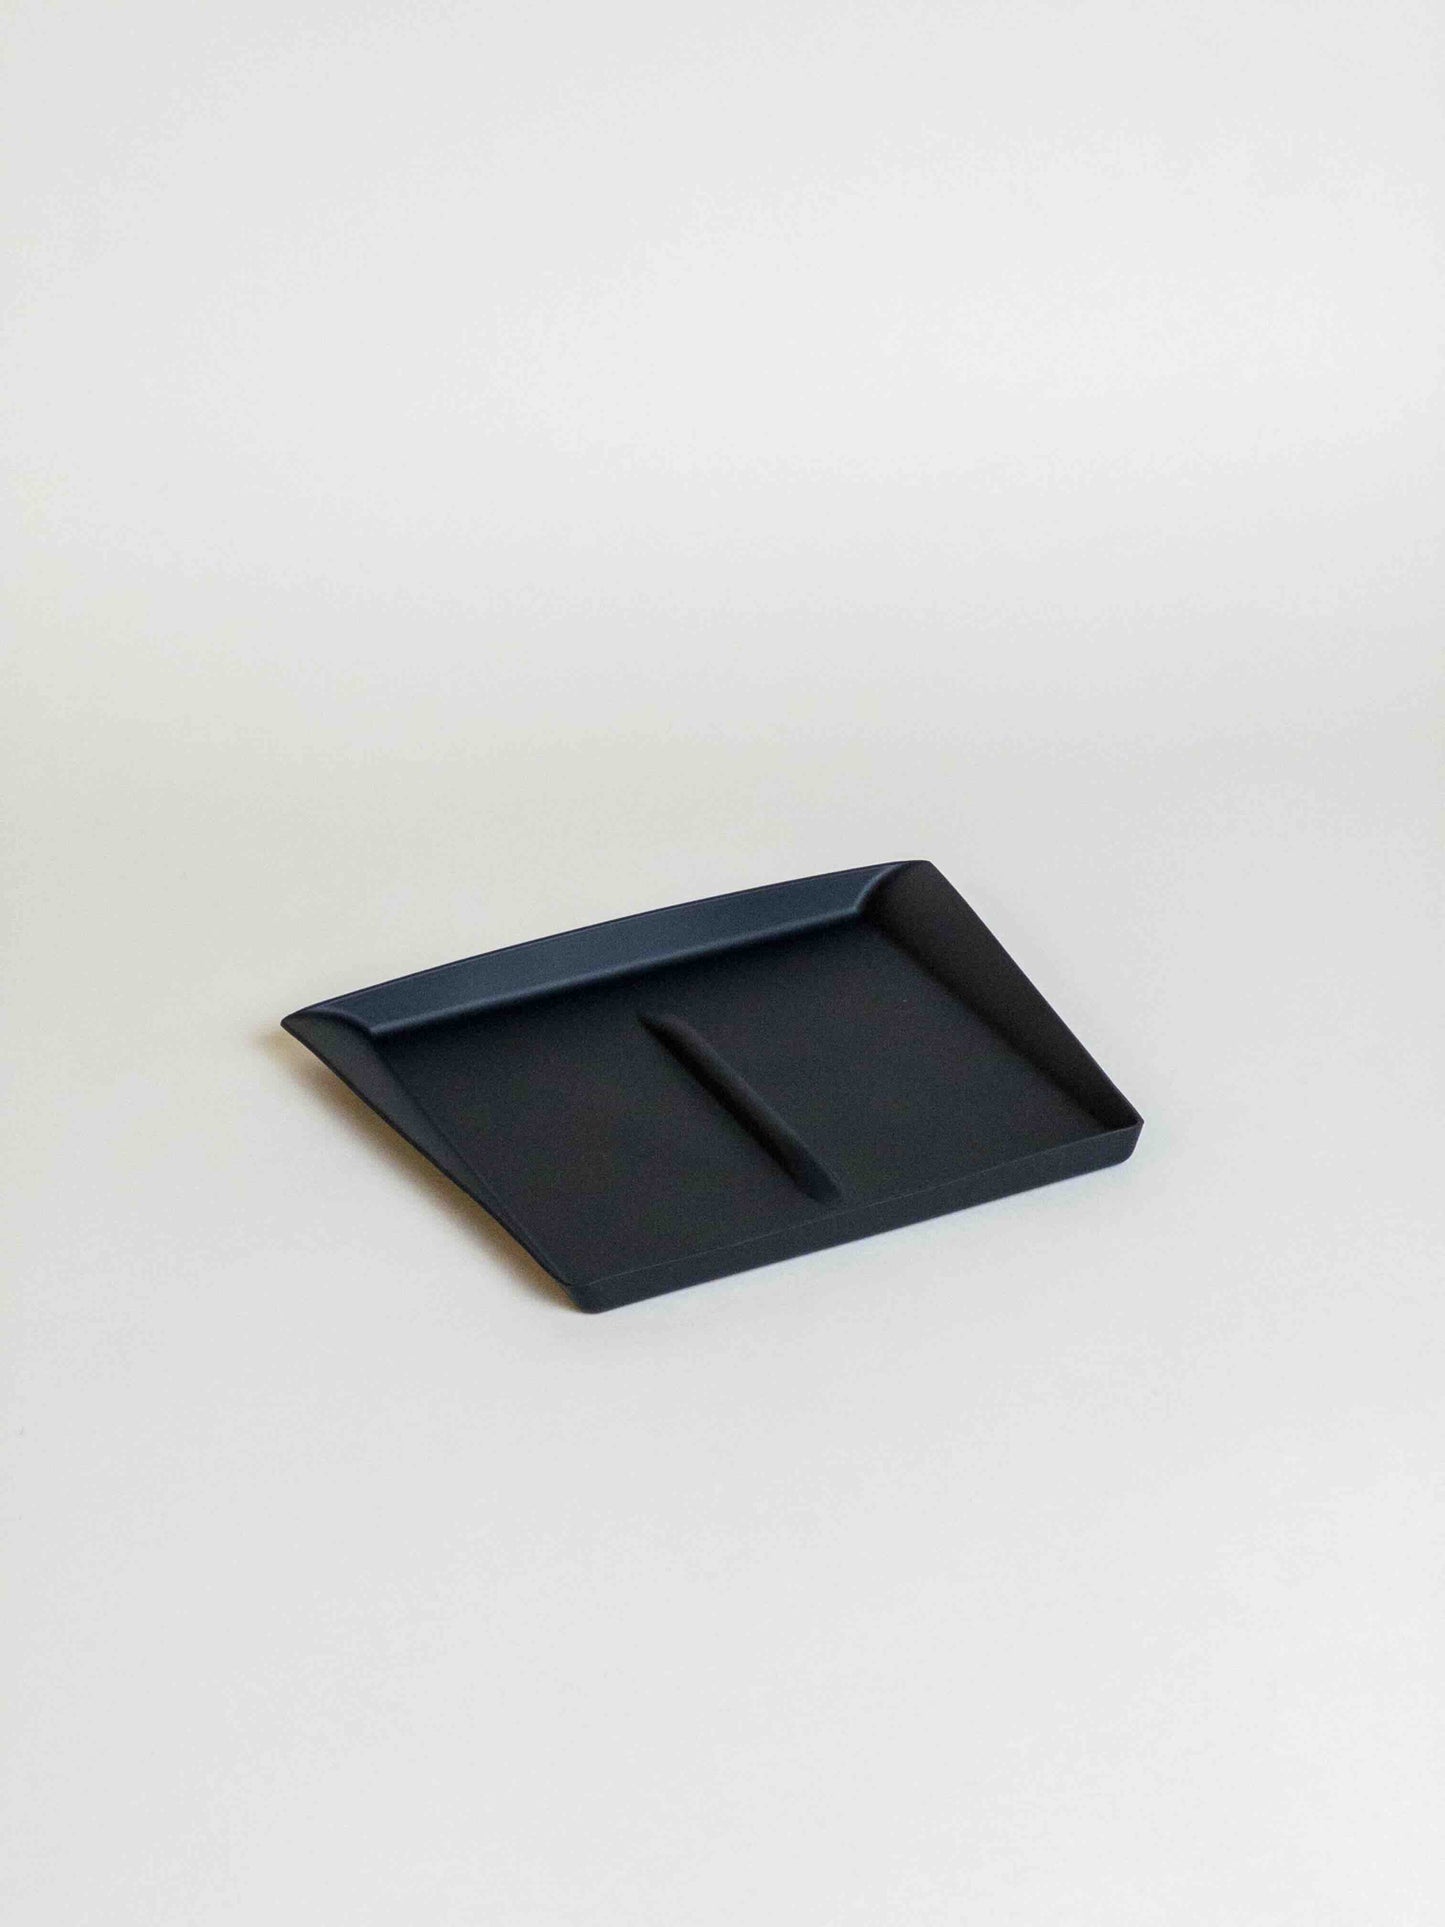 Model 3 Highland wireless charger sillicon pad